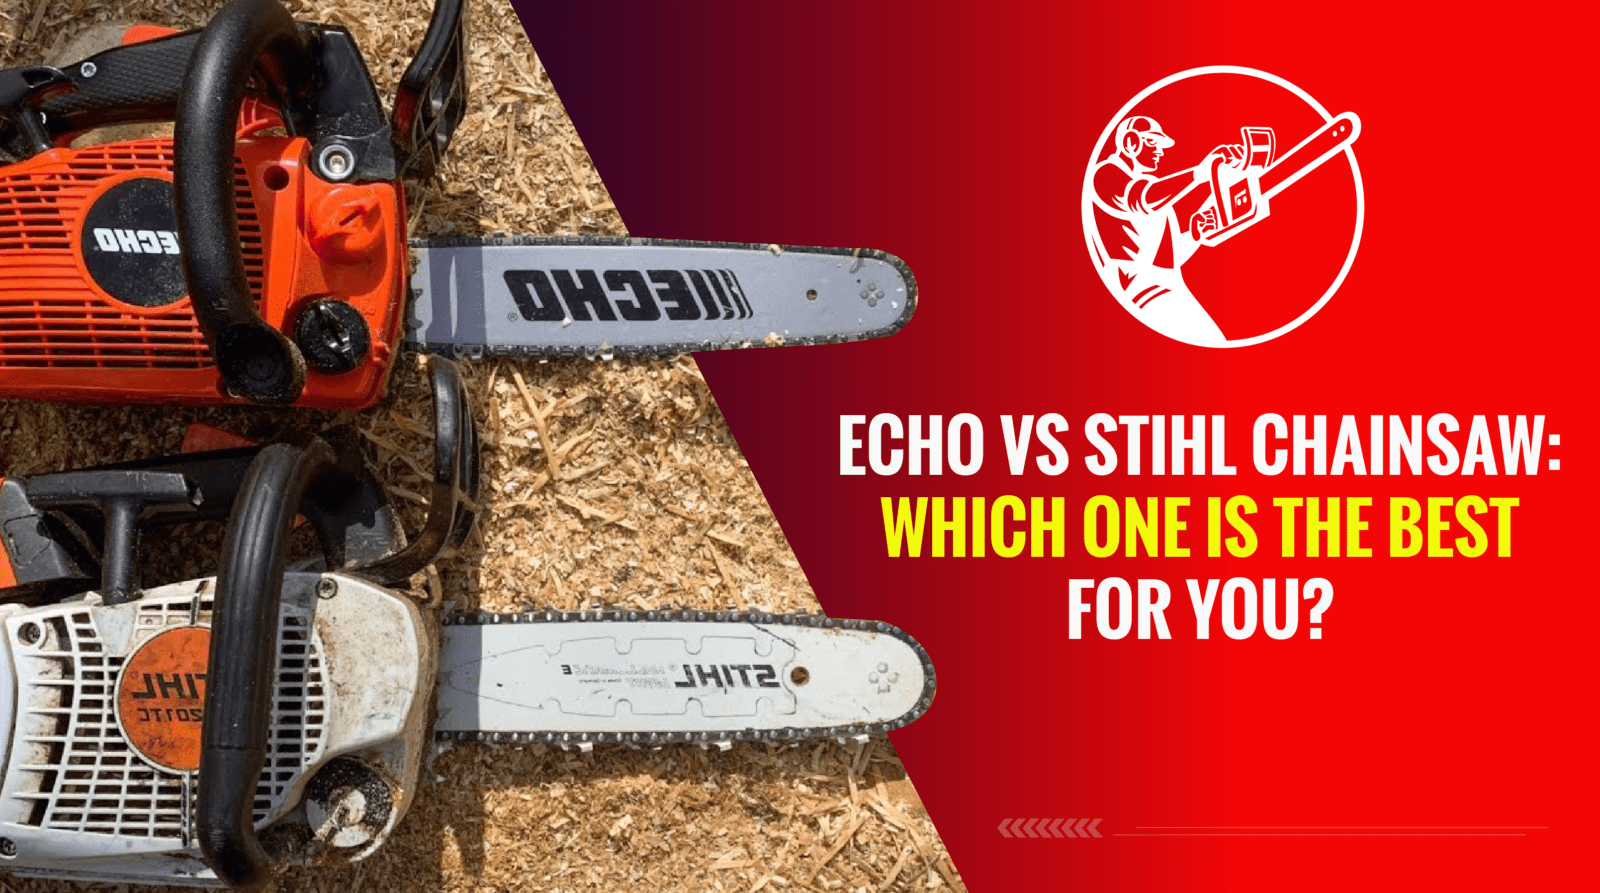 Echo vs Stihl Chainsaw Which One Is the Best for You